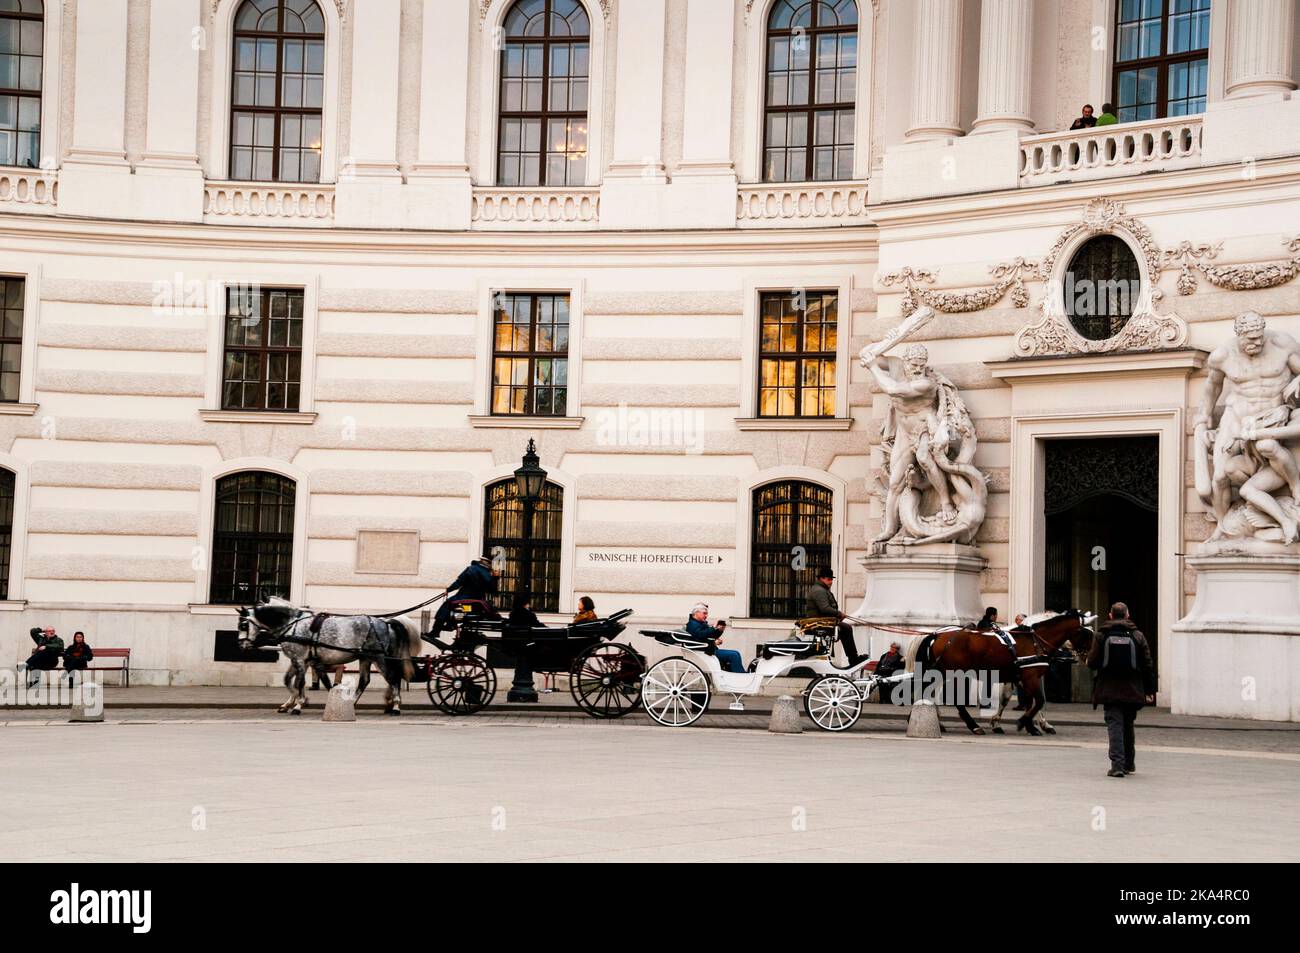 Viennese Fiakers two-horse drawn carriages are a part of the landscape of the capitol city in Austria. Stock Photo